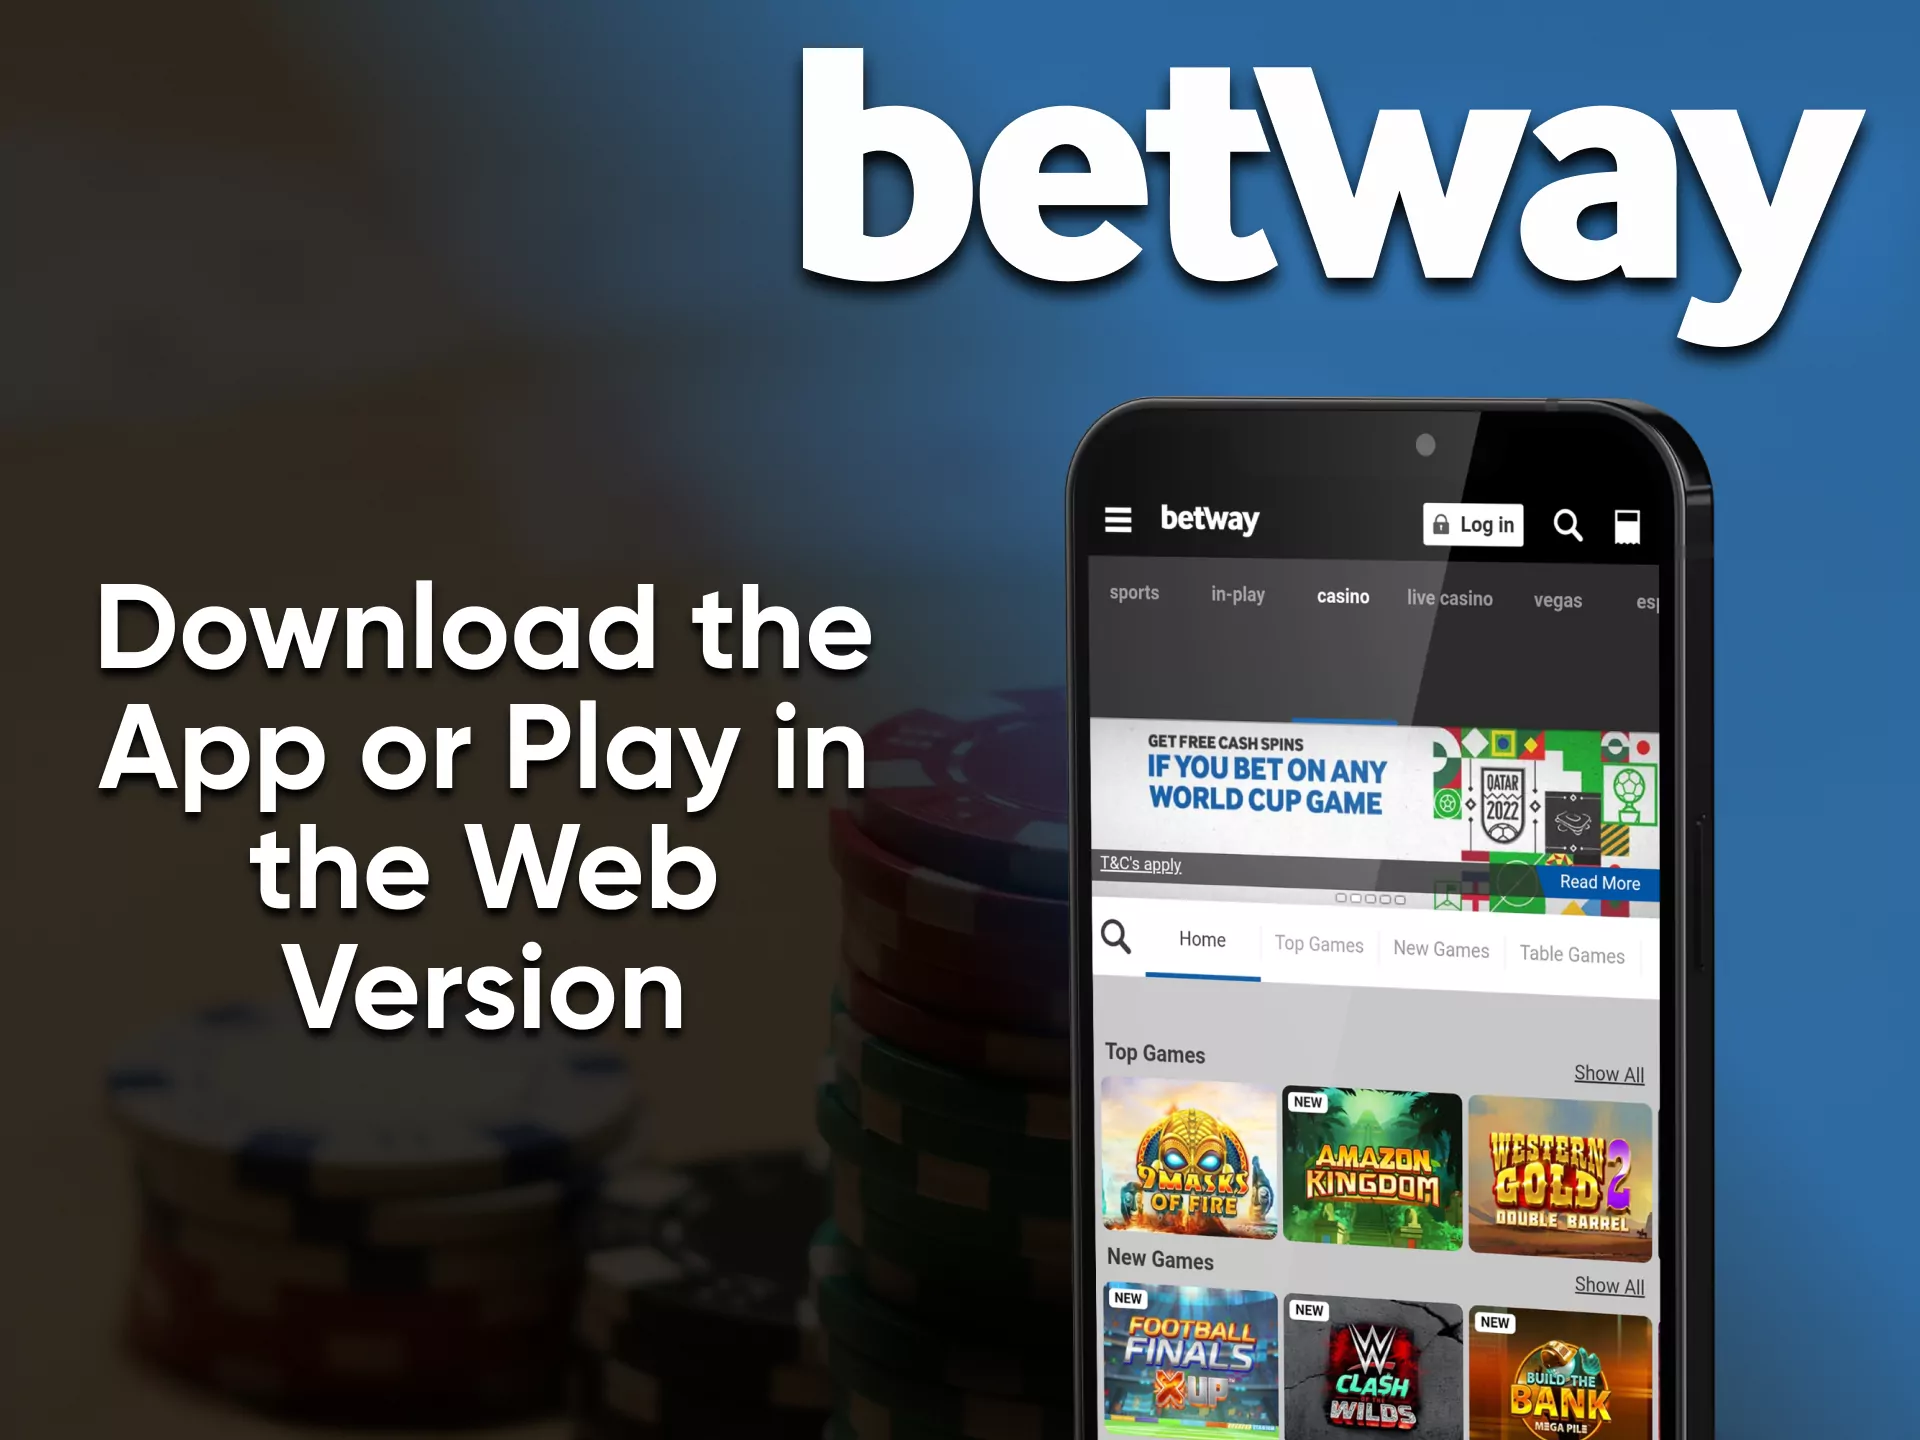 Play at Betway Casino in the way that is convenient for you.